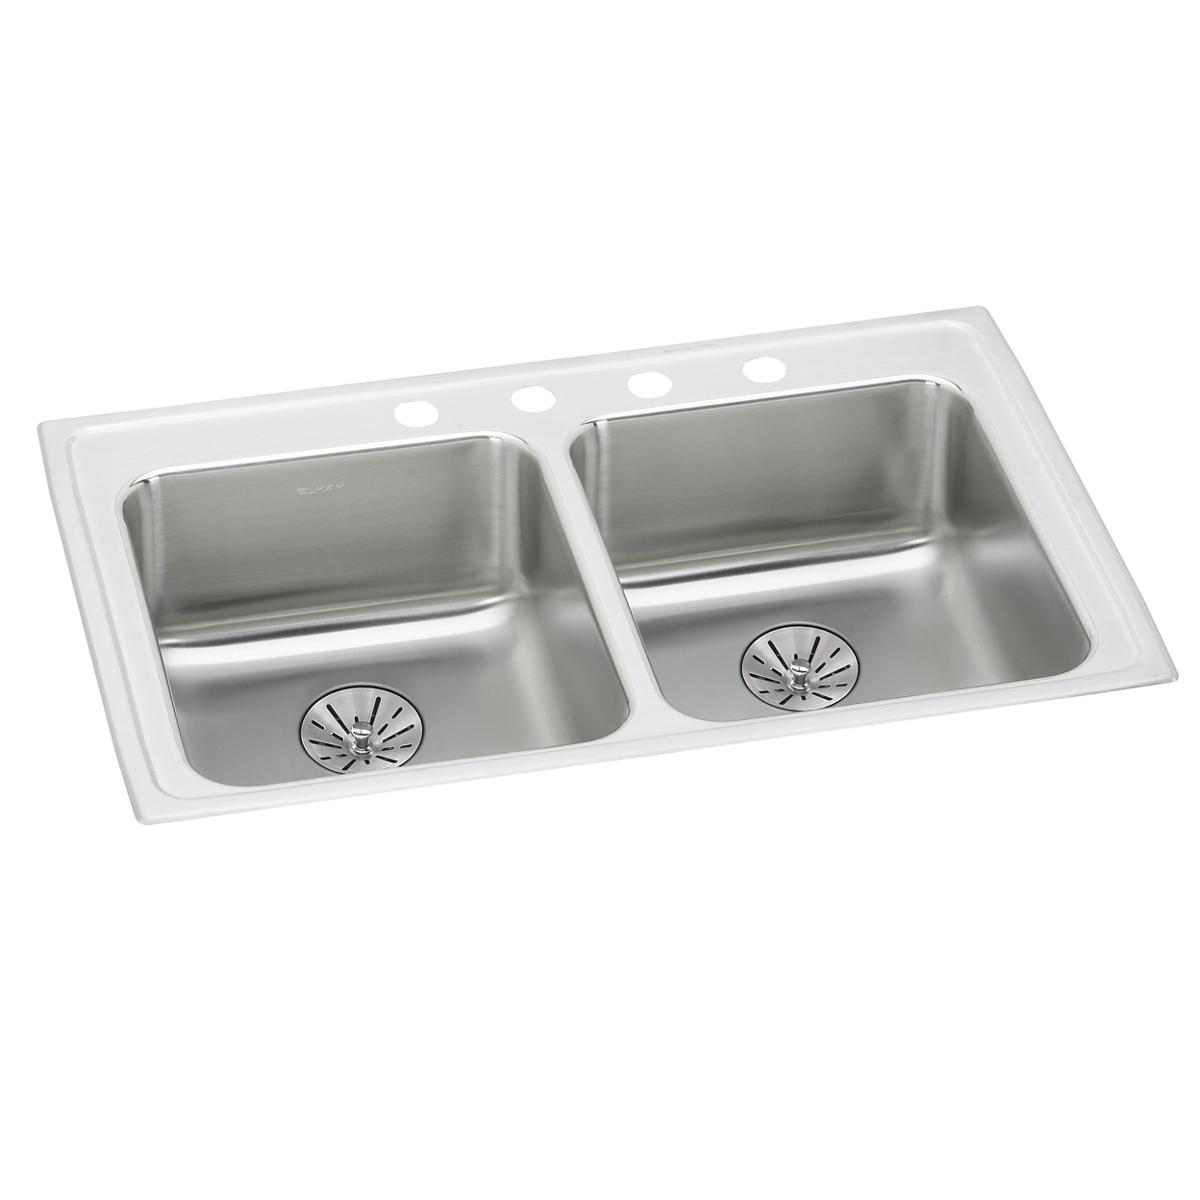 Elkay Lustertone Classic 29" x 22" x 6-1/2" Equal Double Bowl Drop-in ADA Sink with Perfect Drain